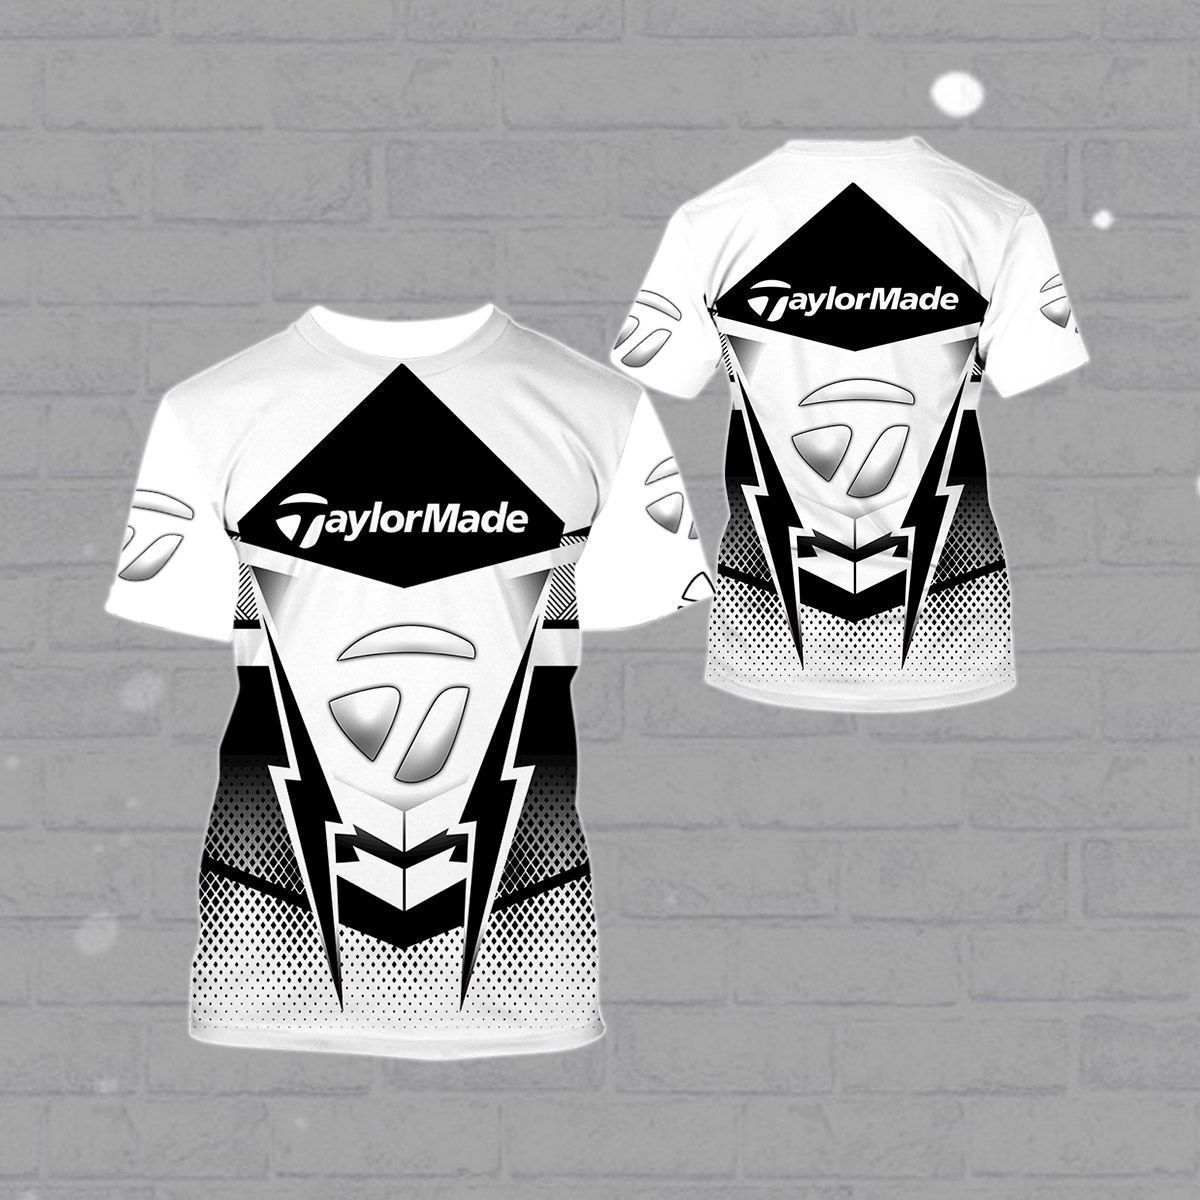 3D All Over Printed TaylorMade Shirts Ver1 (White) – Podoshirt